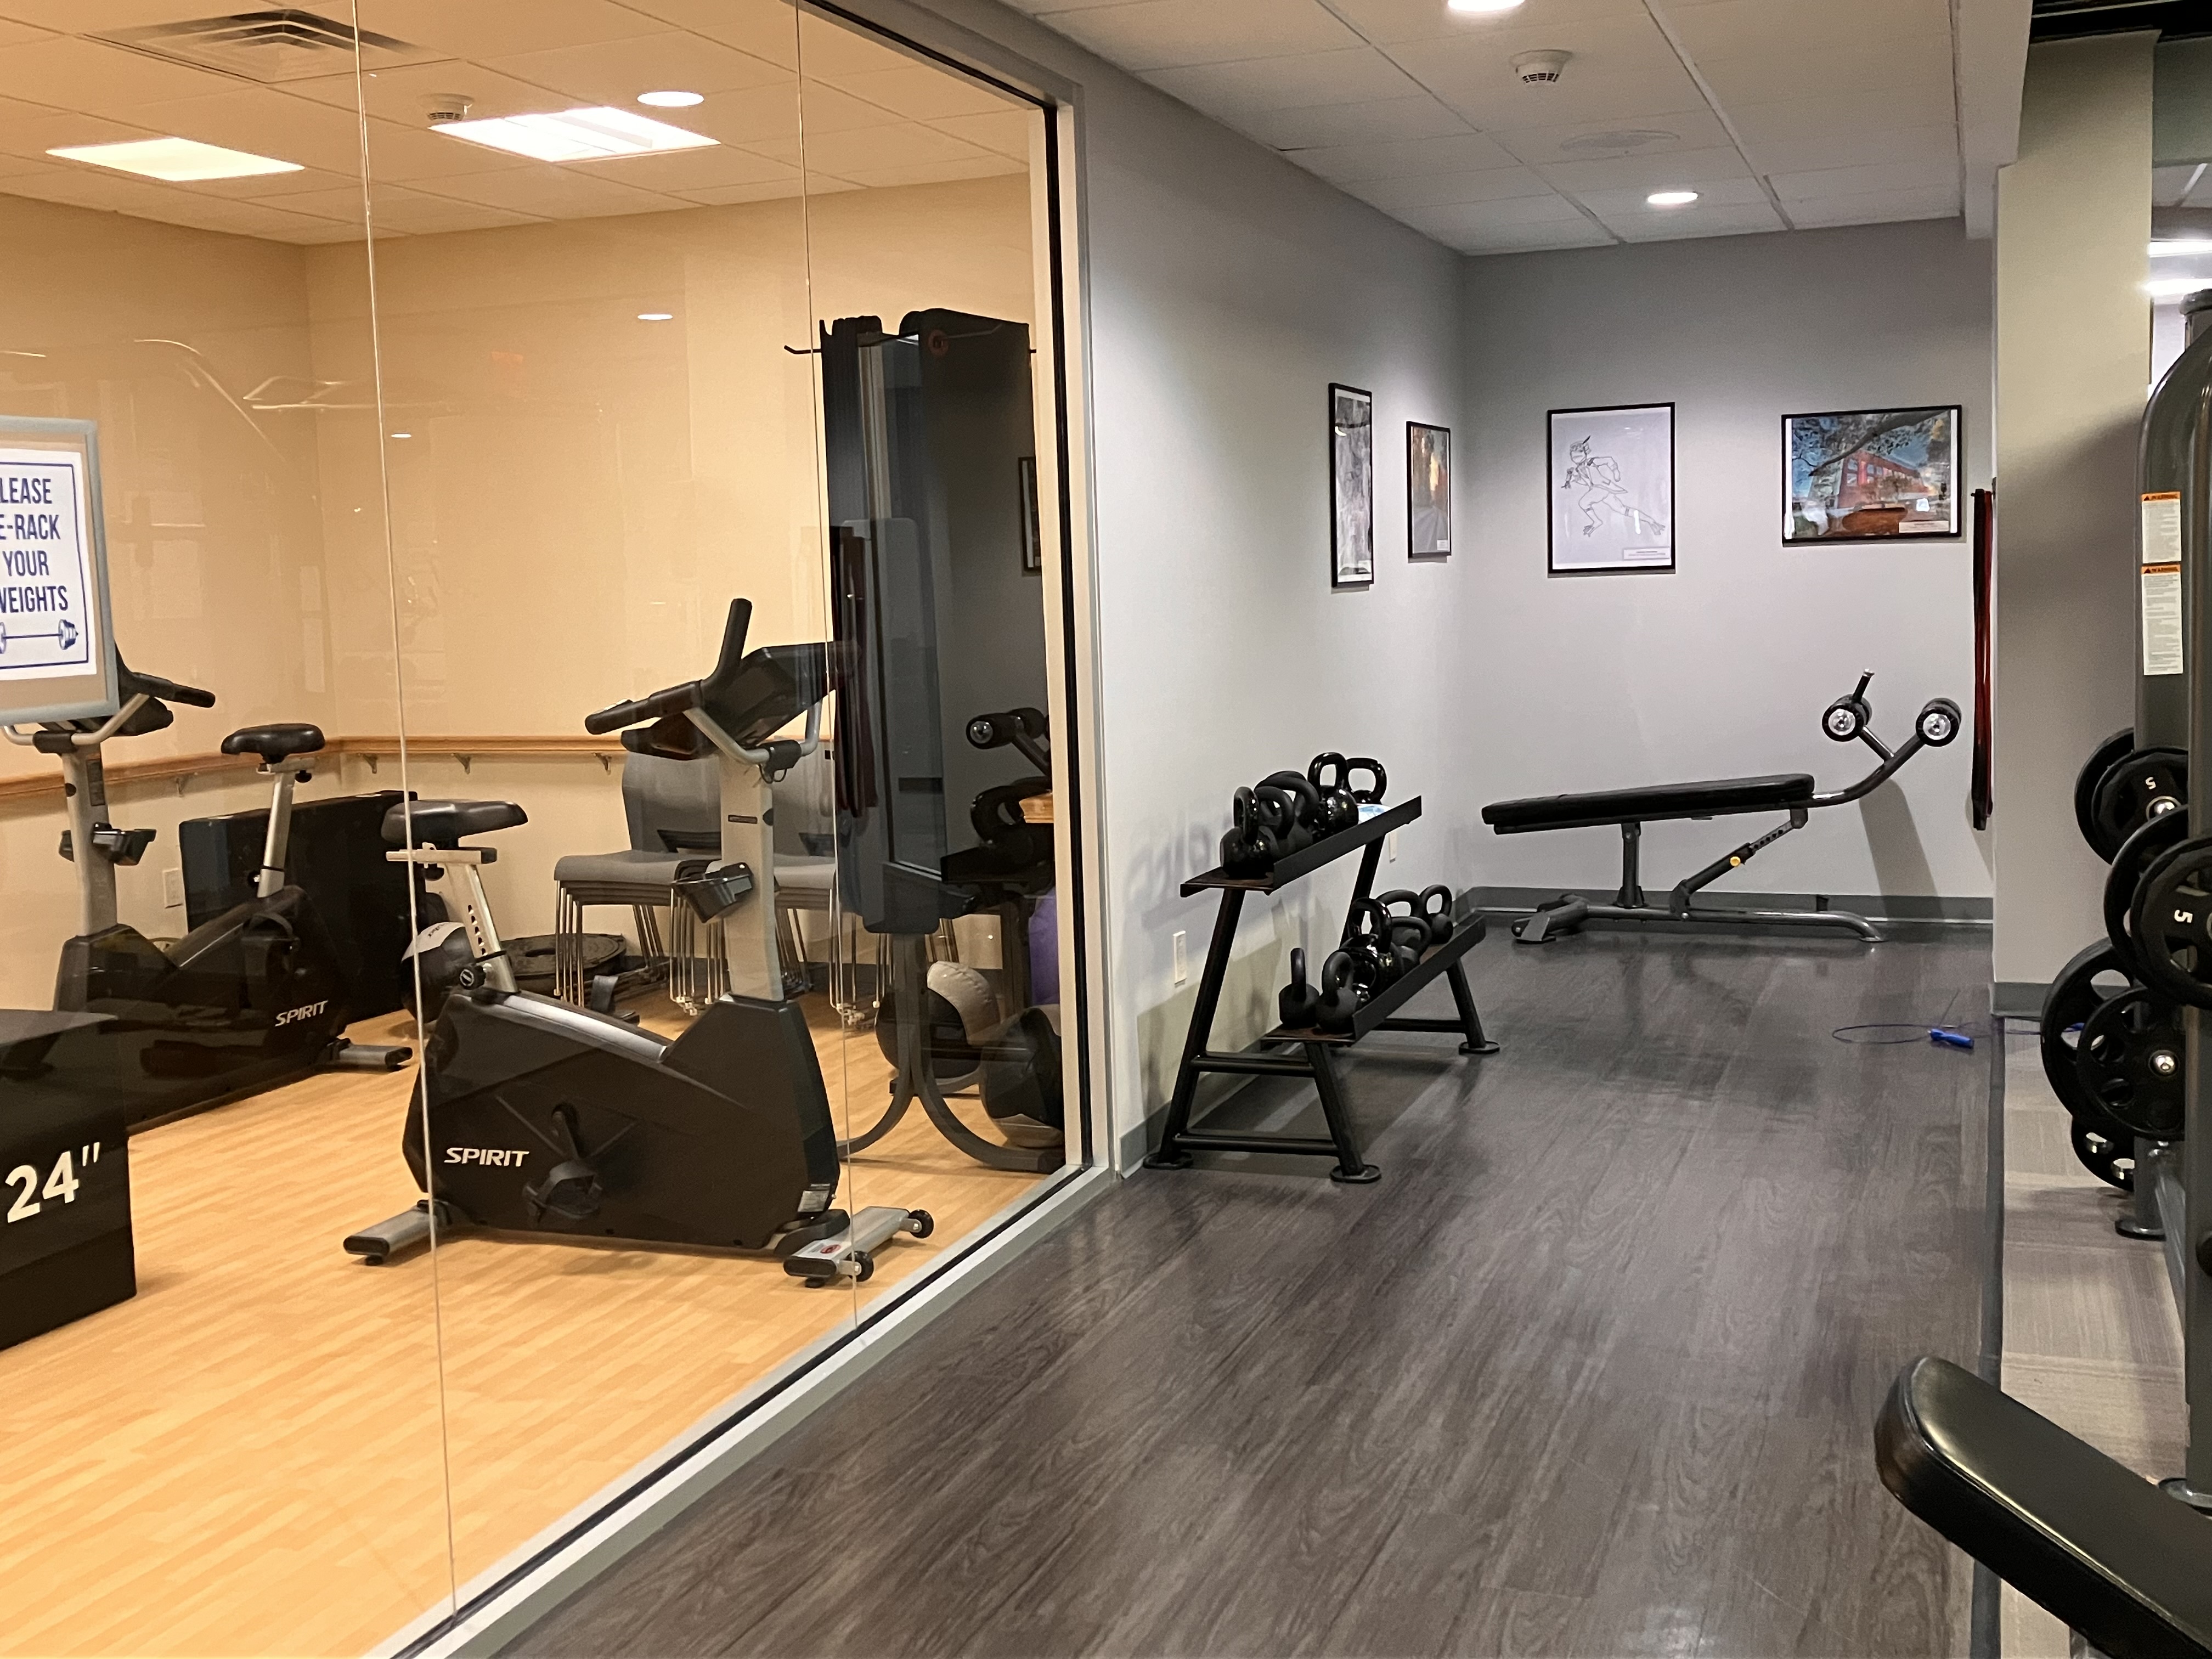 Fitness center with workout equipment and artwork on the walls.